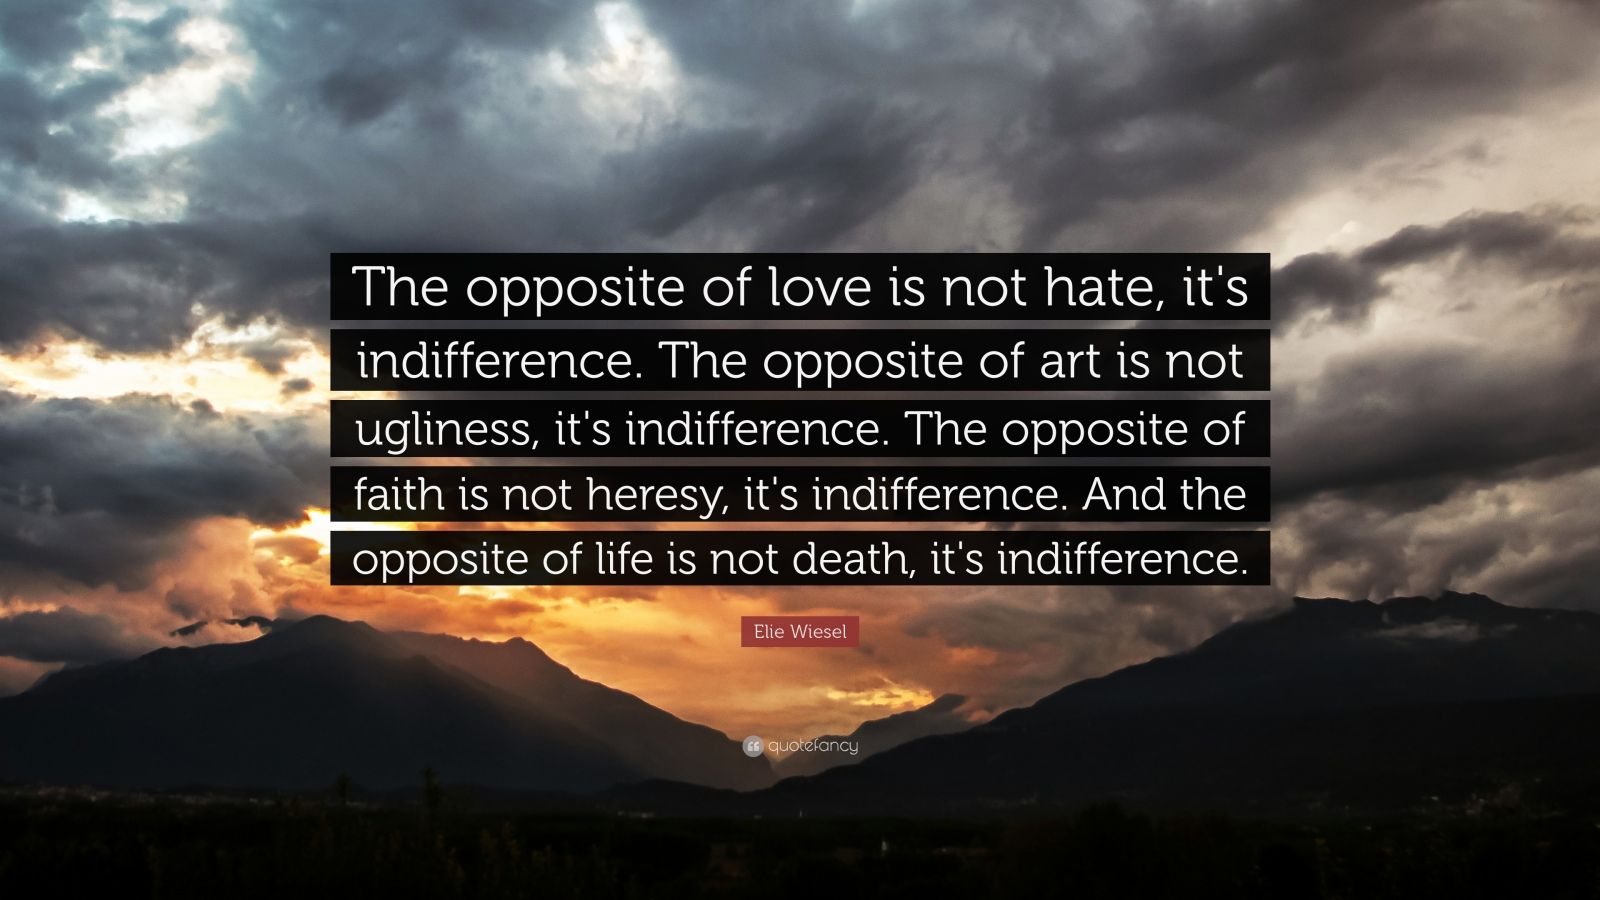 Elie Wiesel Quote: “The opposite of love is not hate, it's indifference